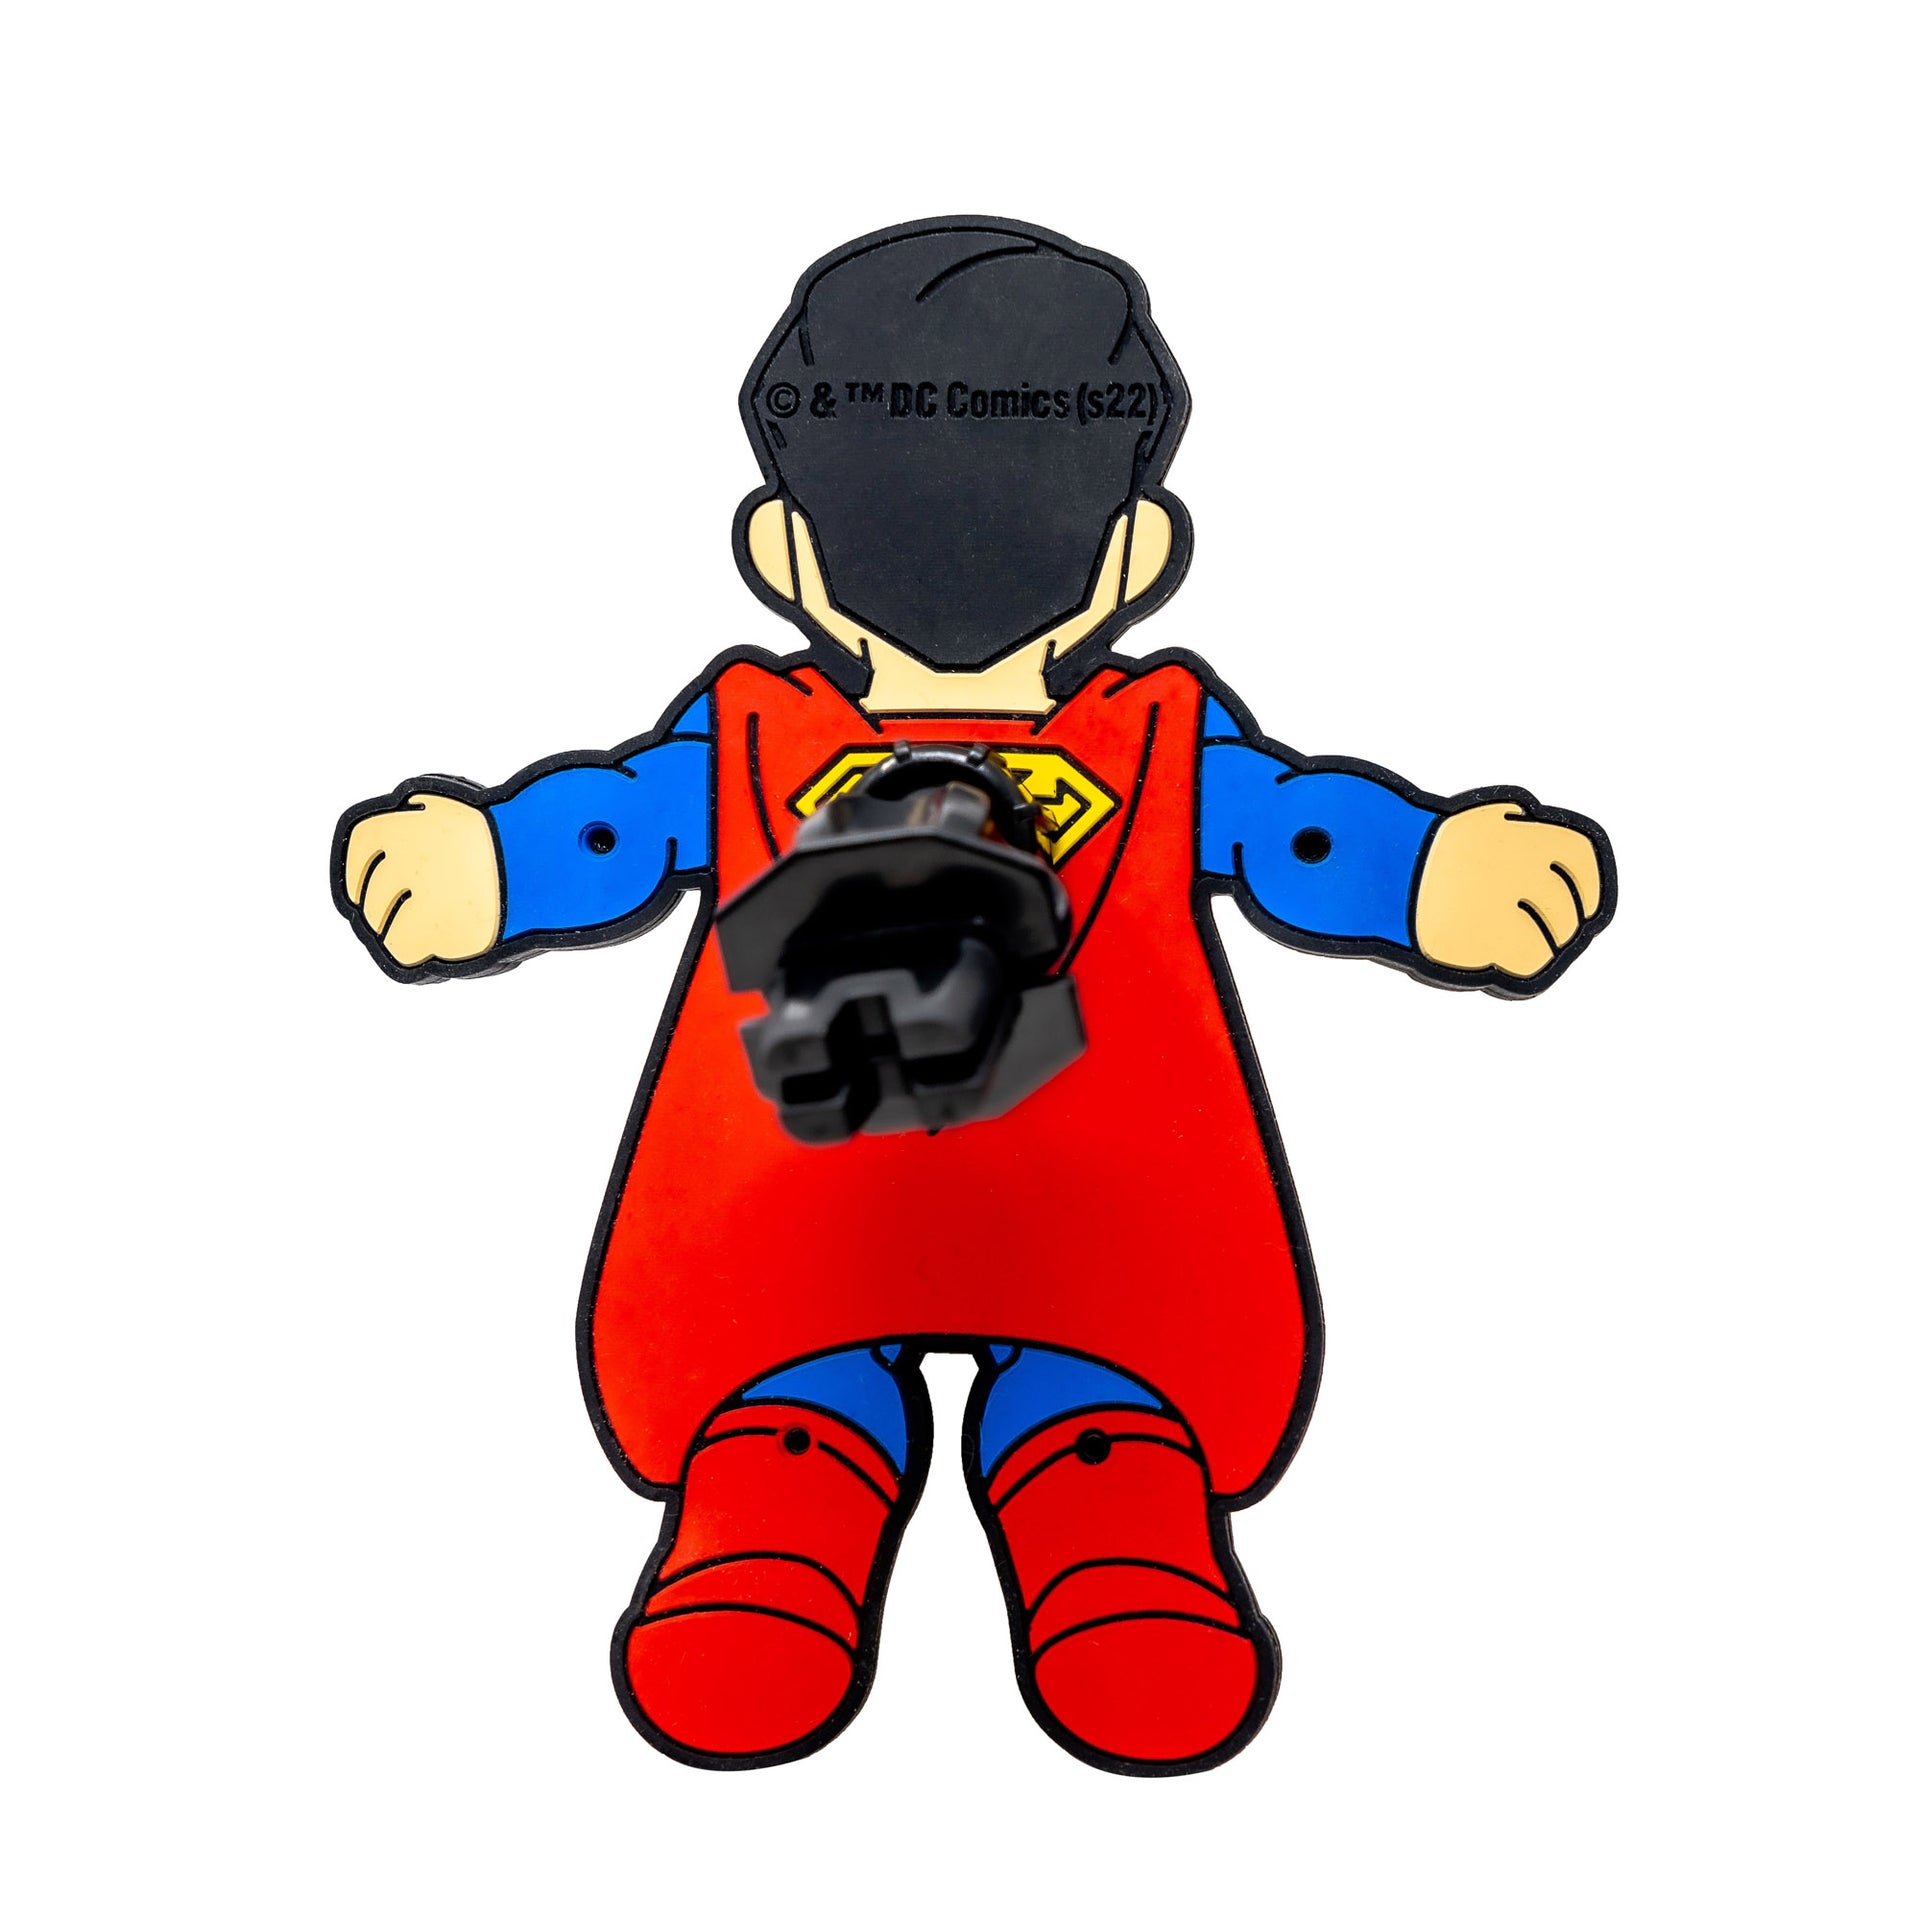 Image of DC Comics Superman Hug Buddy showing the back of the figure and a close-up of the vent clip, on a white background